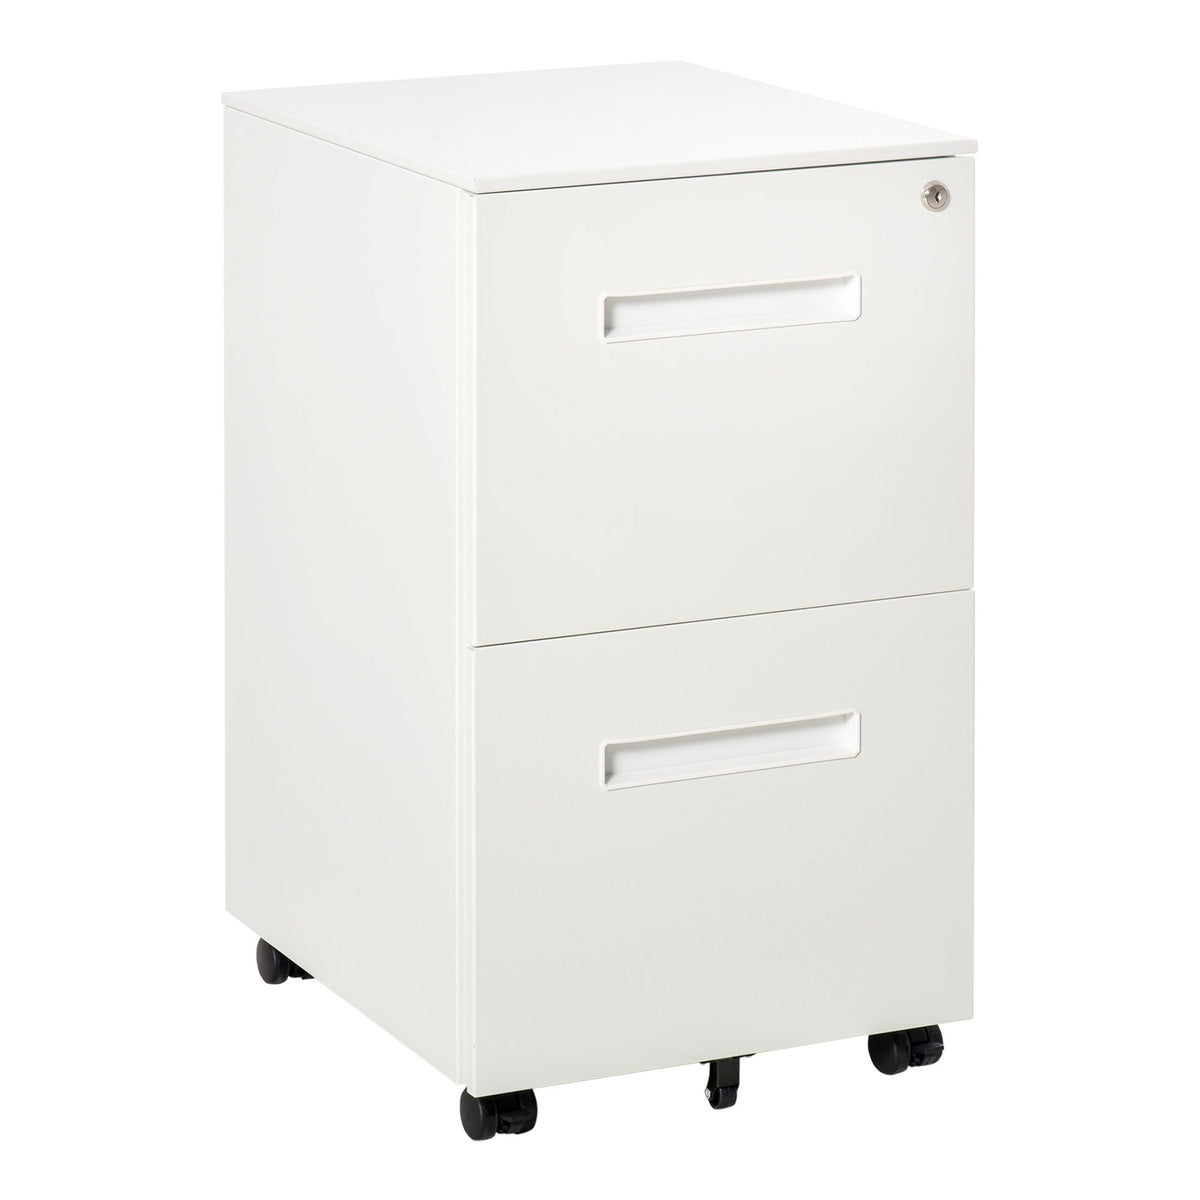 Vinsetto Mobile File Cabinet Vertical Home Office Organizer Filing Furniture with Adjustable Partition for A4 Letter Size, Lockable White - TovaHaus